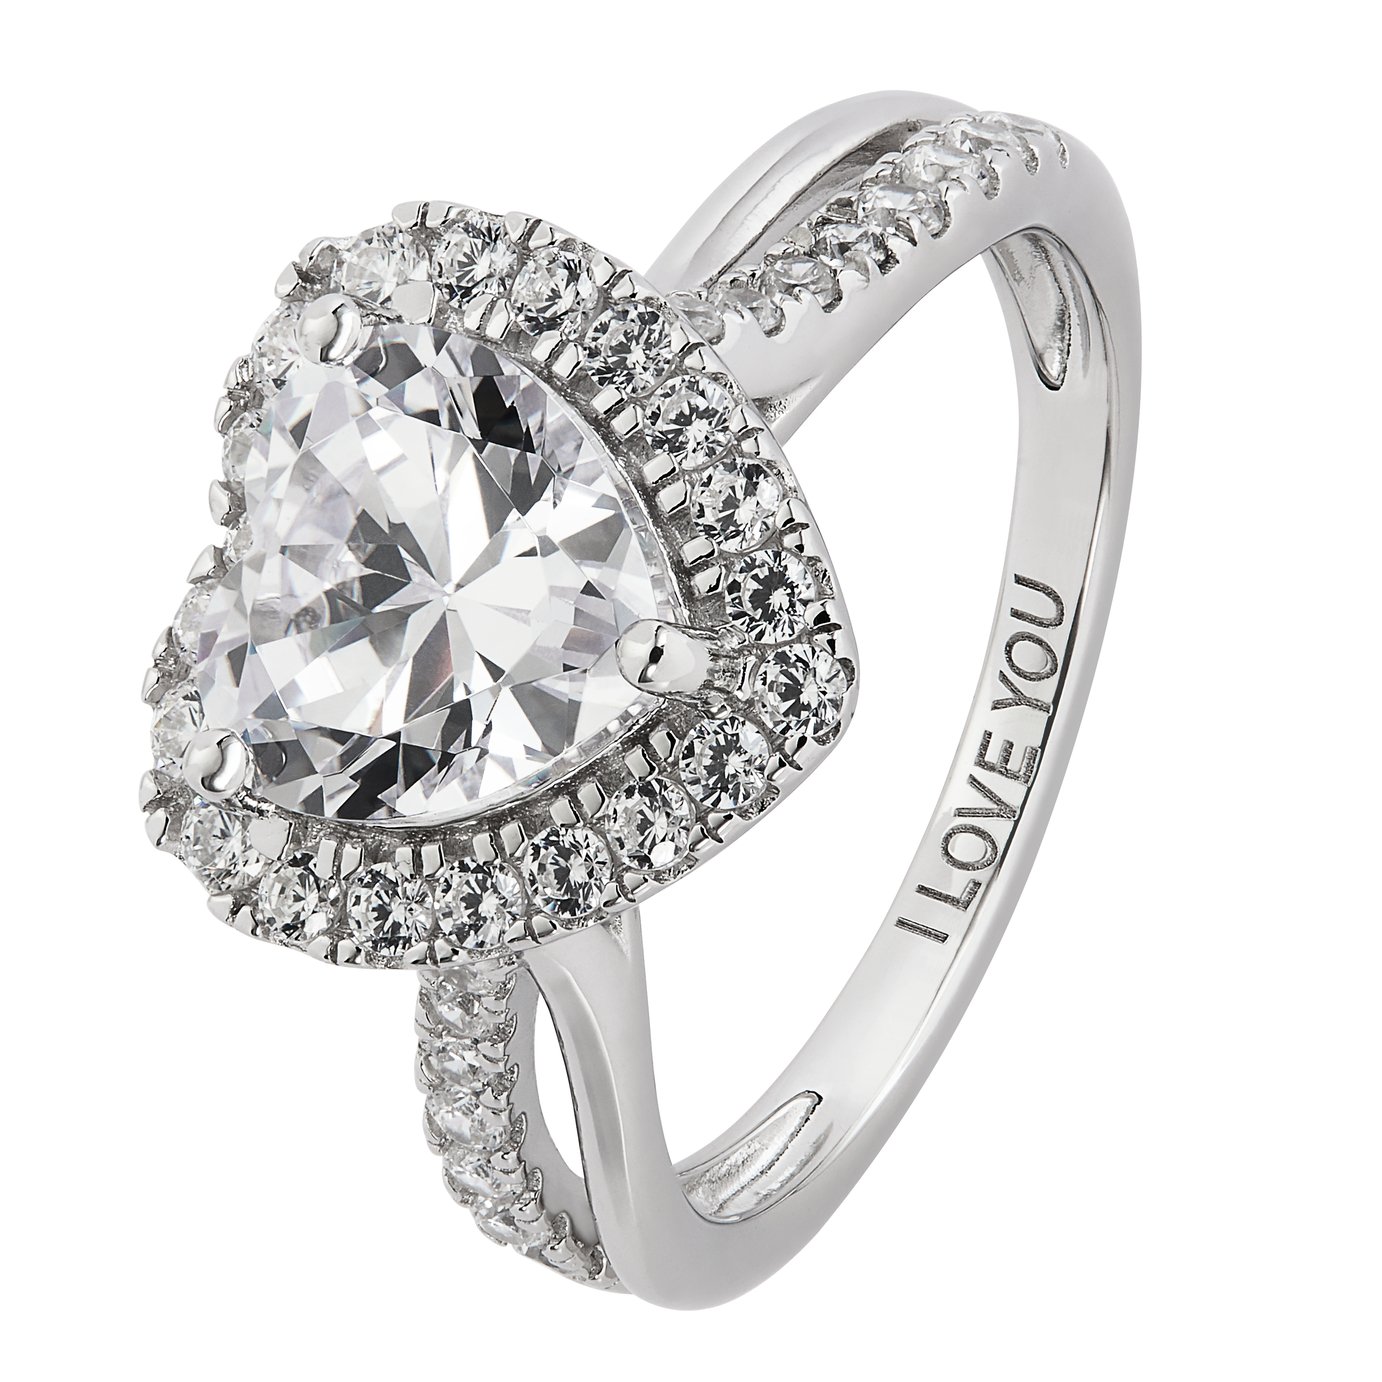 Revere Sterling Silver Cubic Zirconia Engagement Ring - T